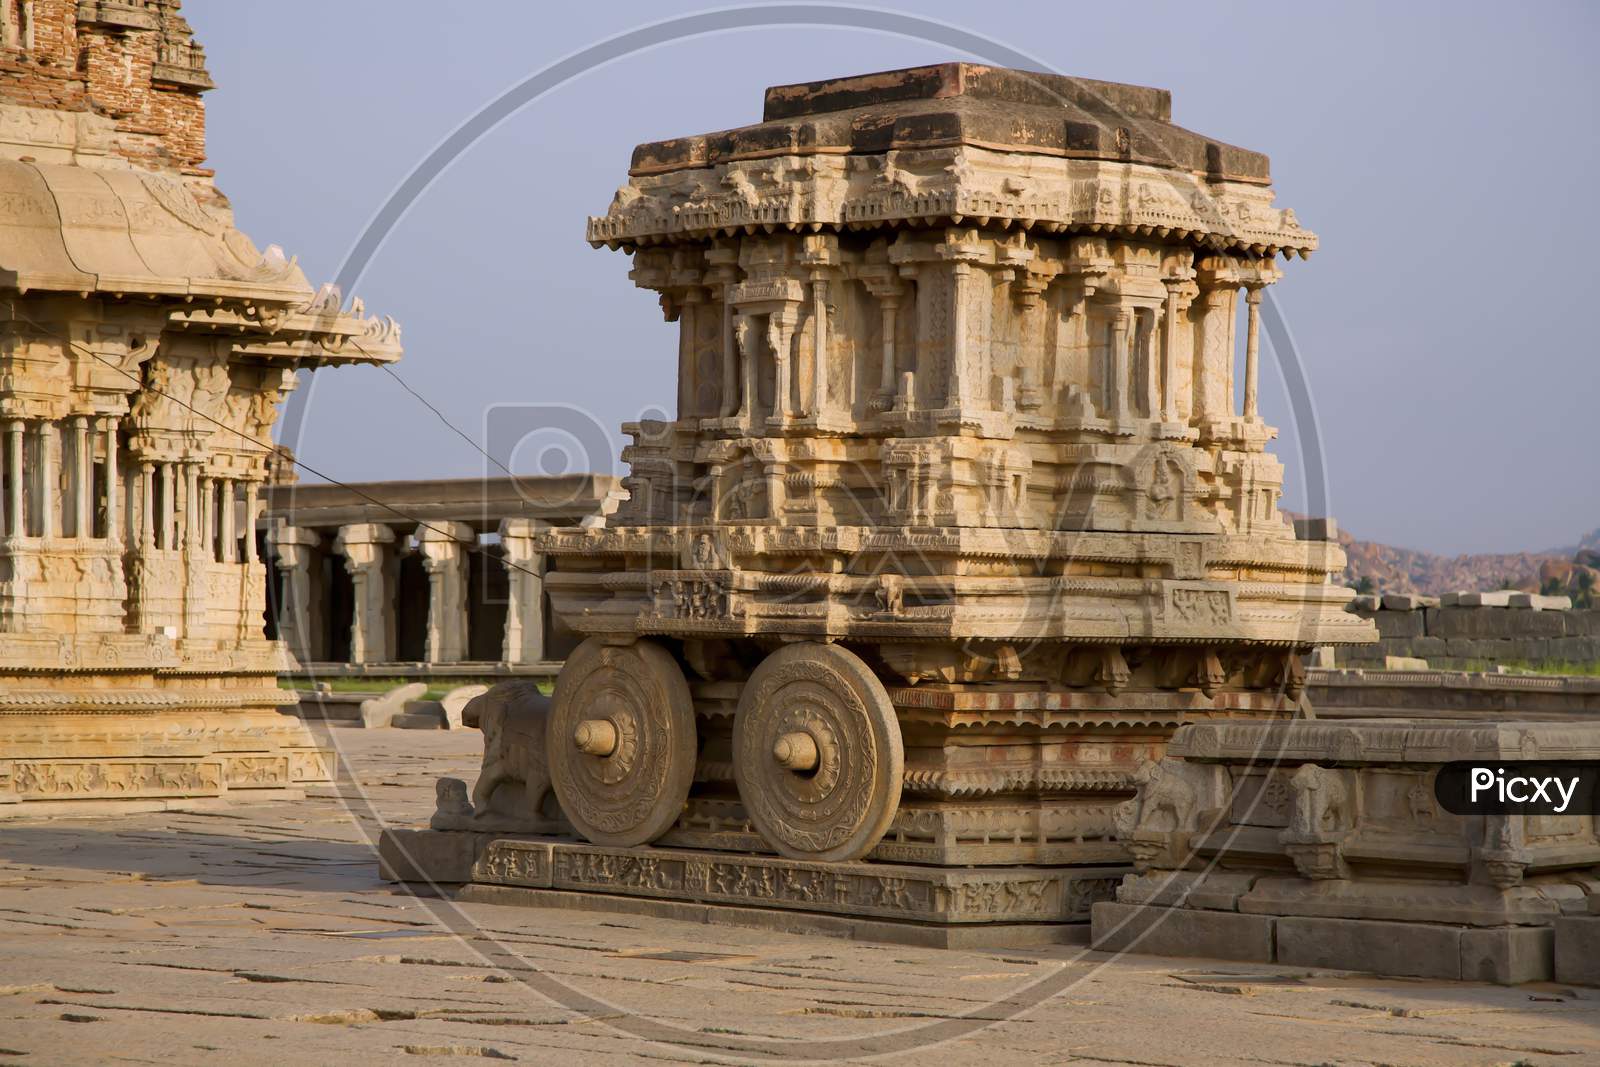 The Stone Chariot At The Vitthala Temple In Hampi In India, A Corner View Of The Stone Chariot In The Vitthala Temple.